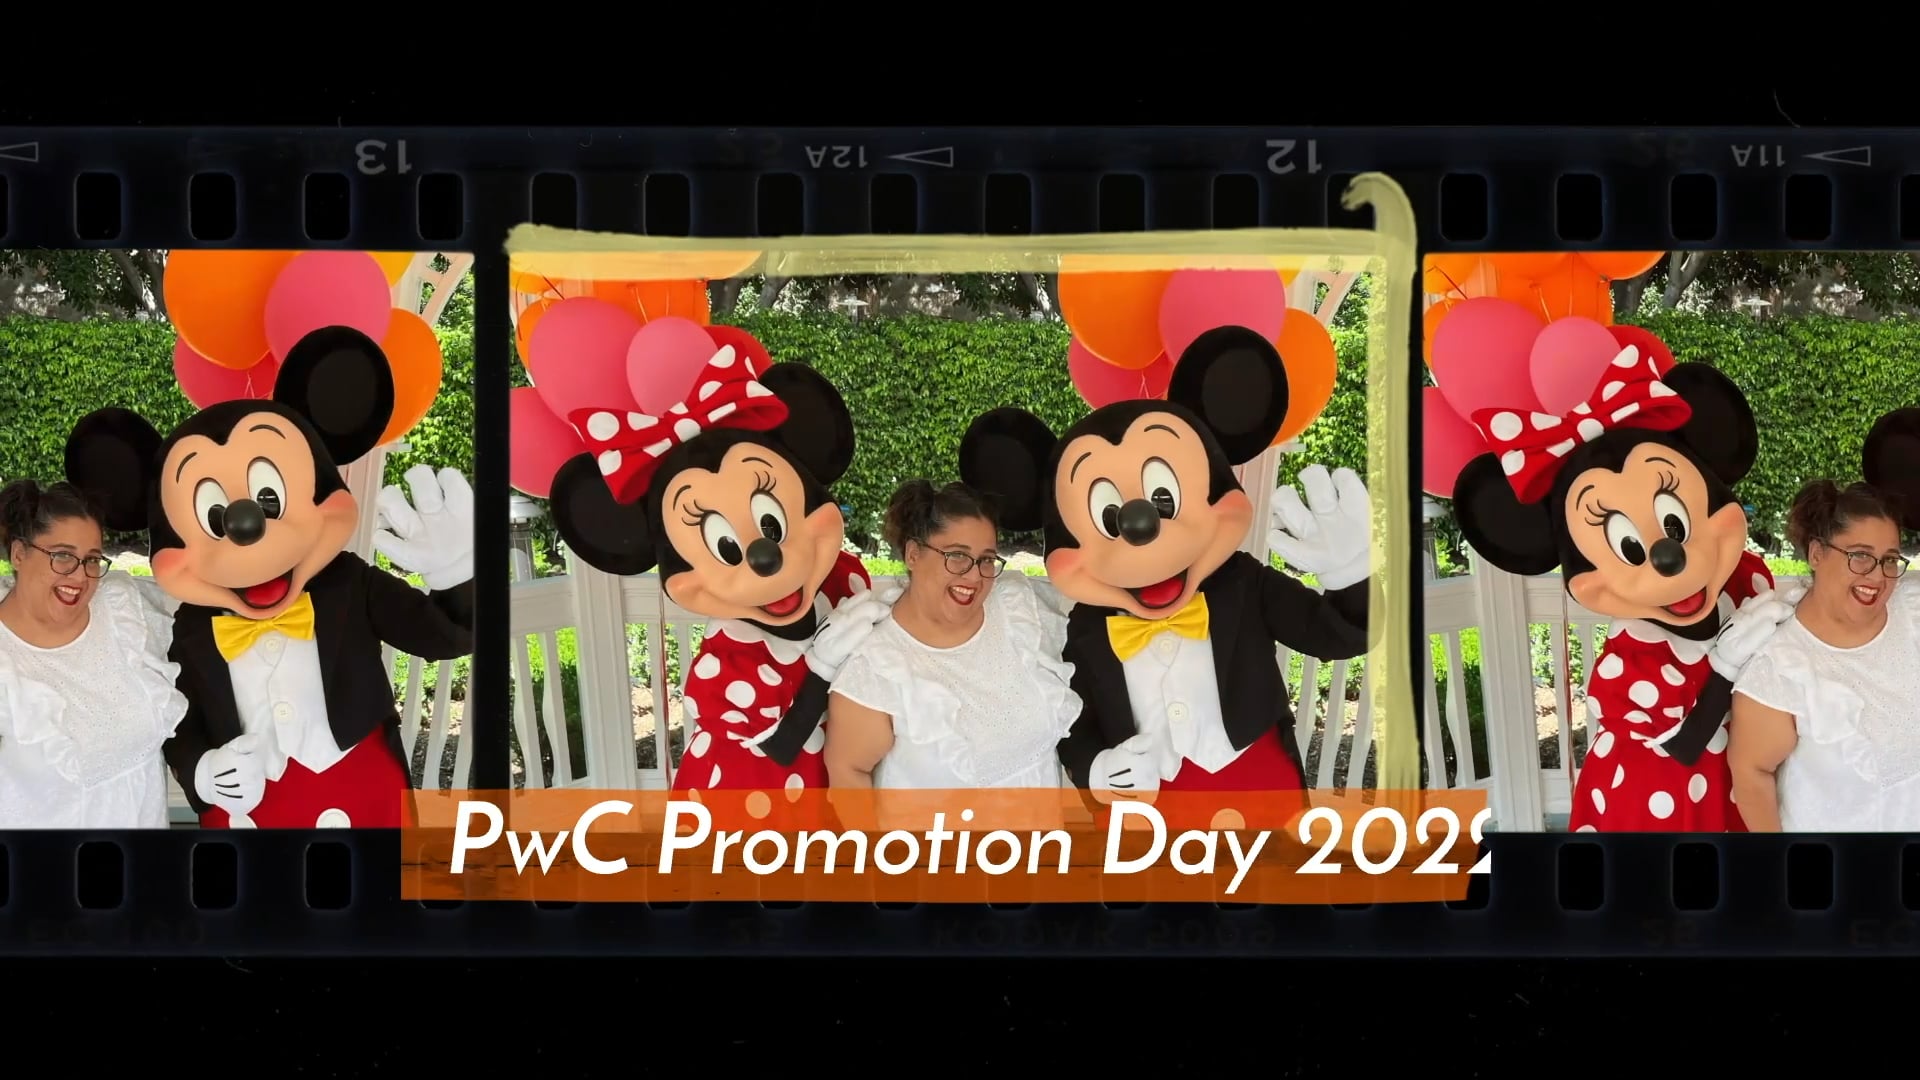 PwC Promotion Day 2022.mp4 on Vimeo